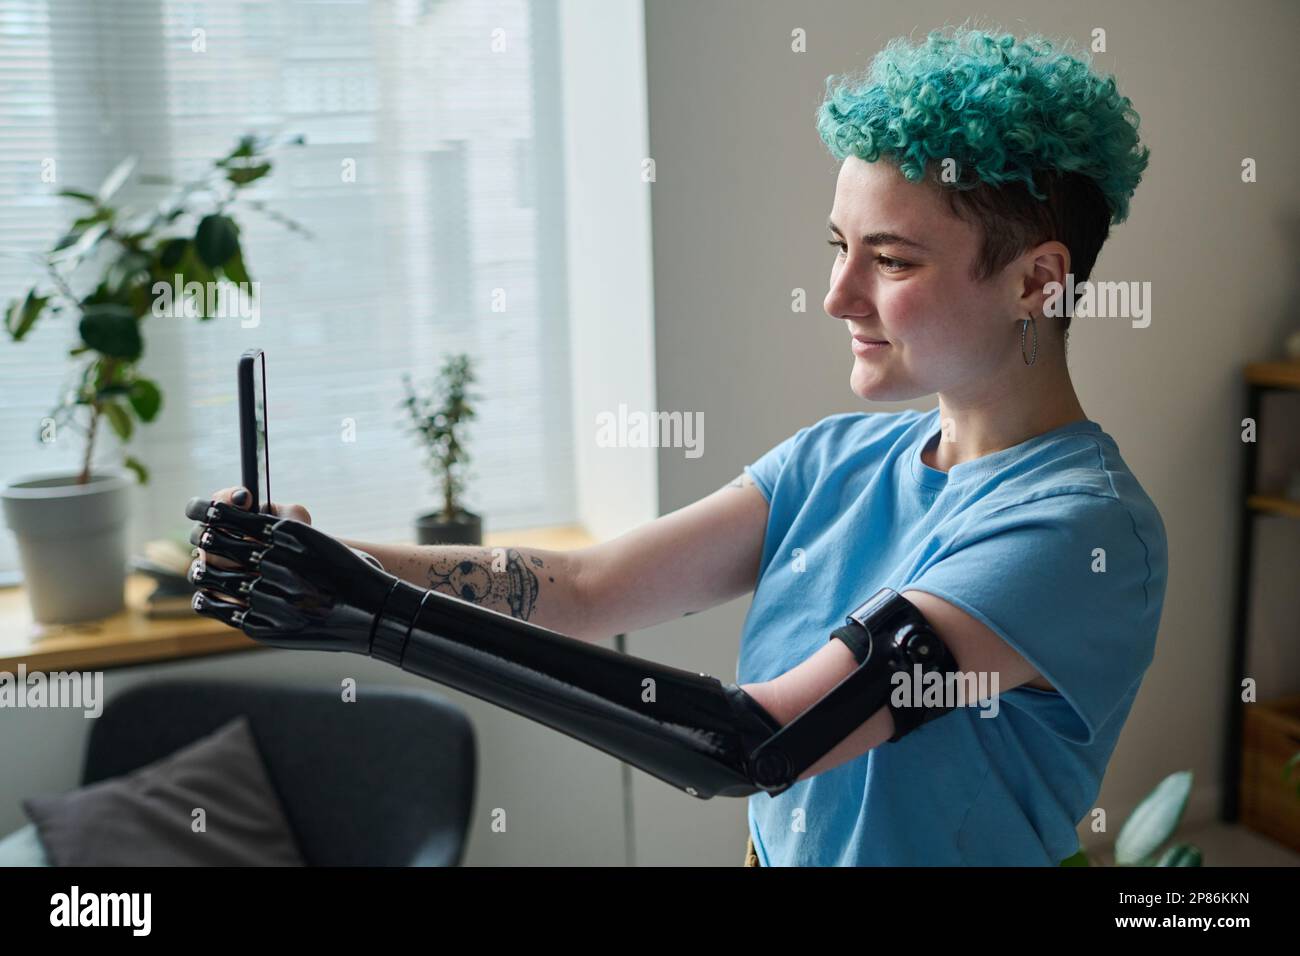 Young blogger with prosthetic arm using smartphone to talk to her followers during online broadcast Stock Photo